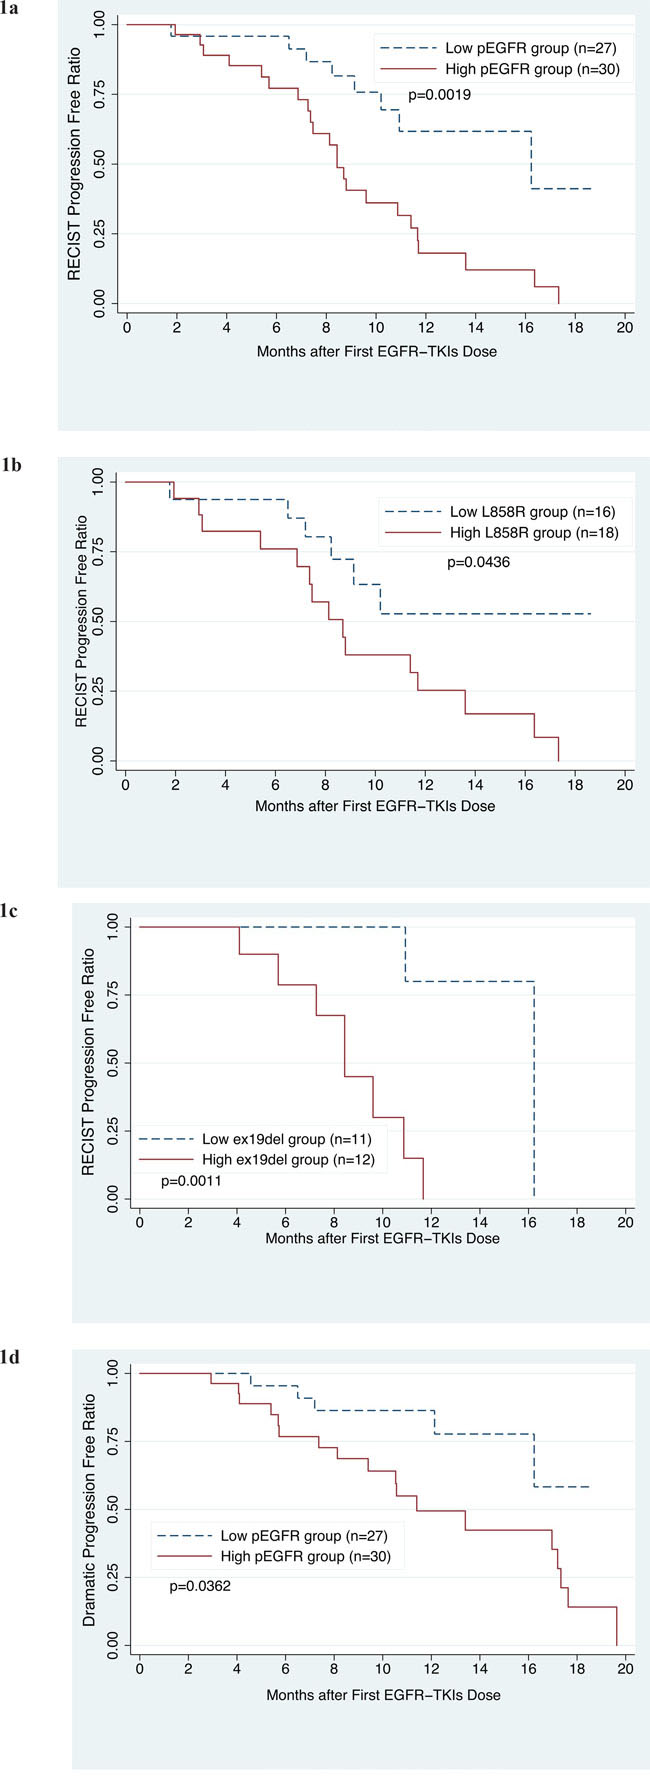 Progression-free survival curves for the 57 patients treated with EGFR-TKIs.